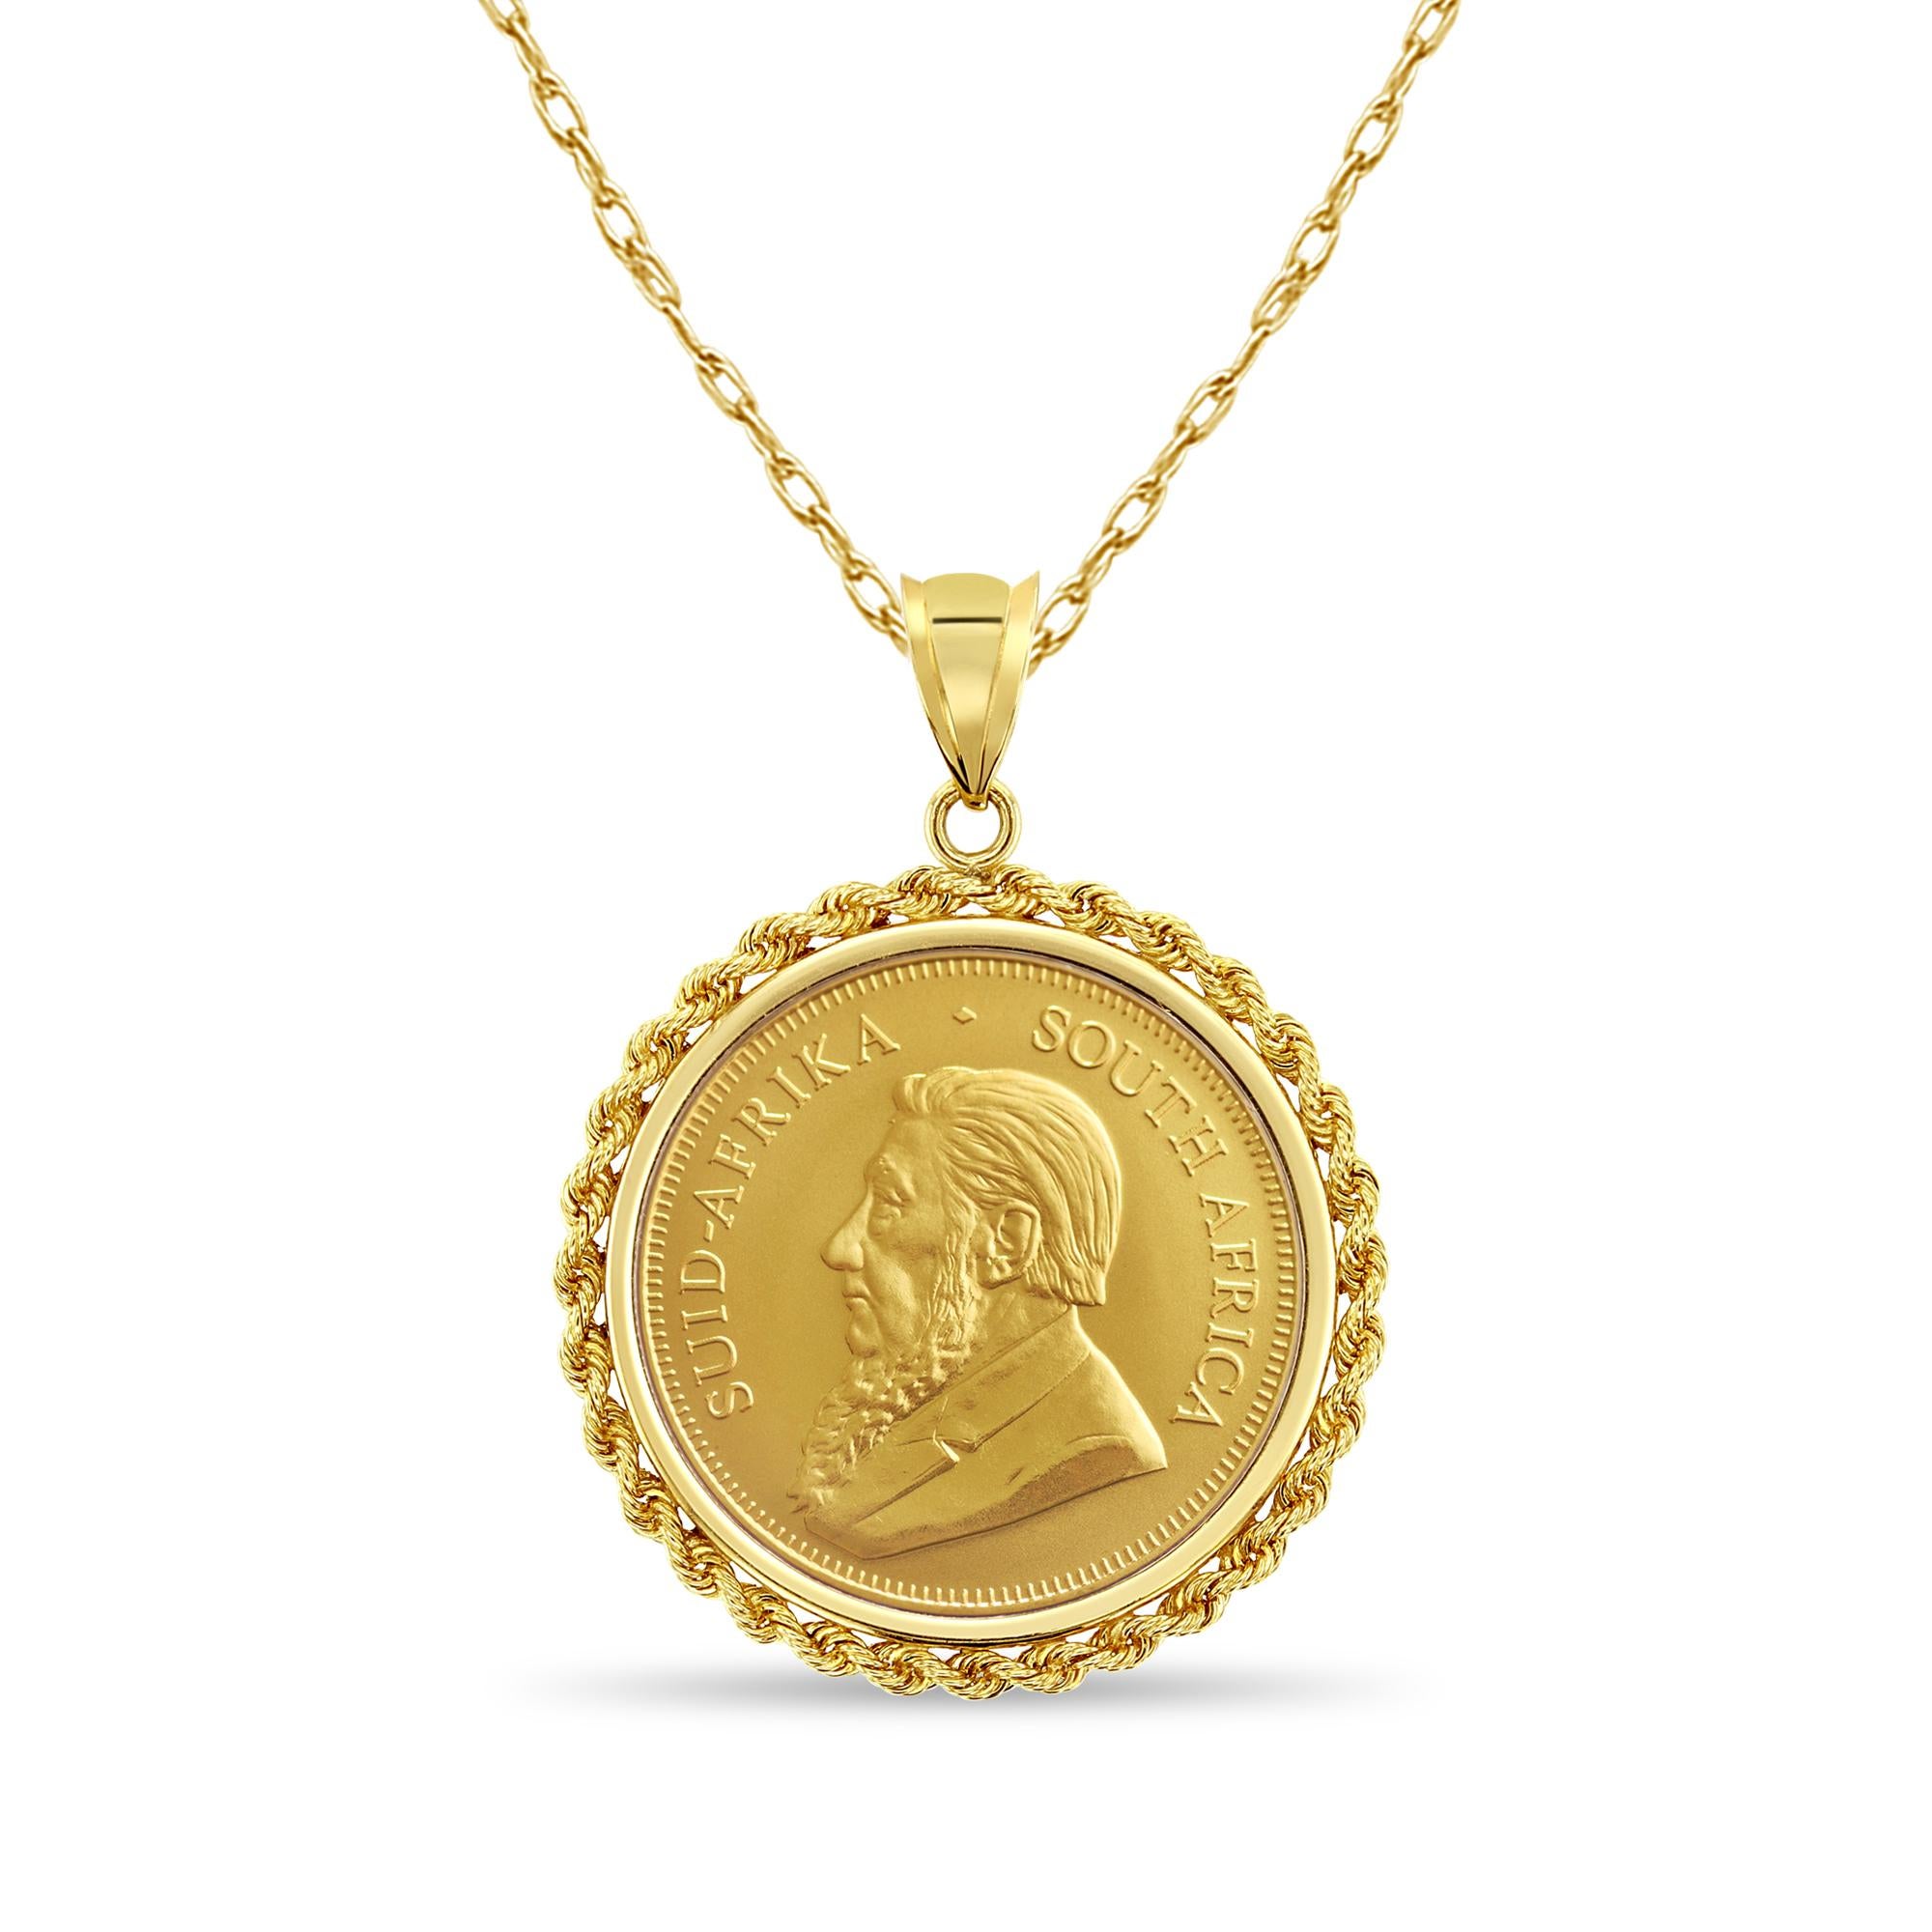 1OZ Fine Gold South African Krugerrand Coin Necklace with Rope Bezel For Sale